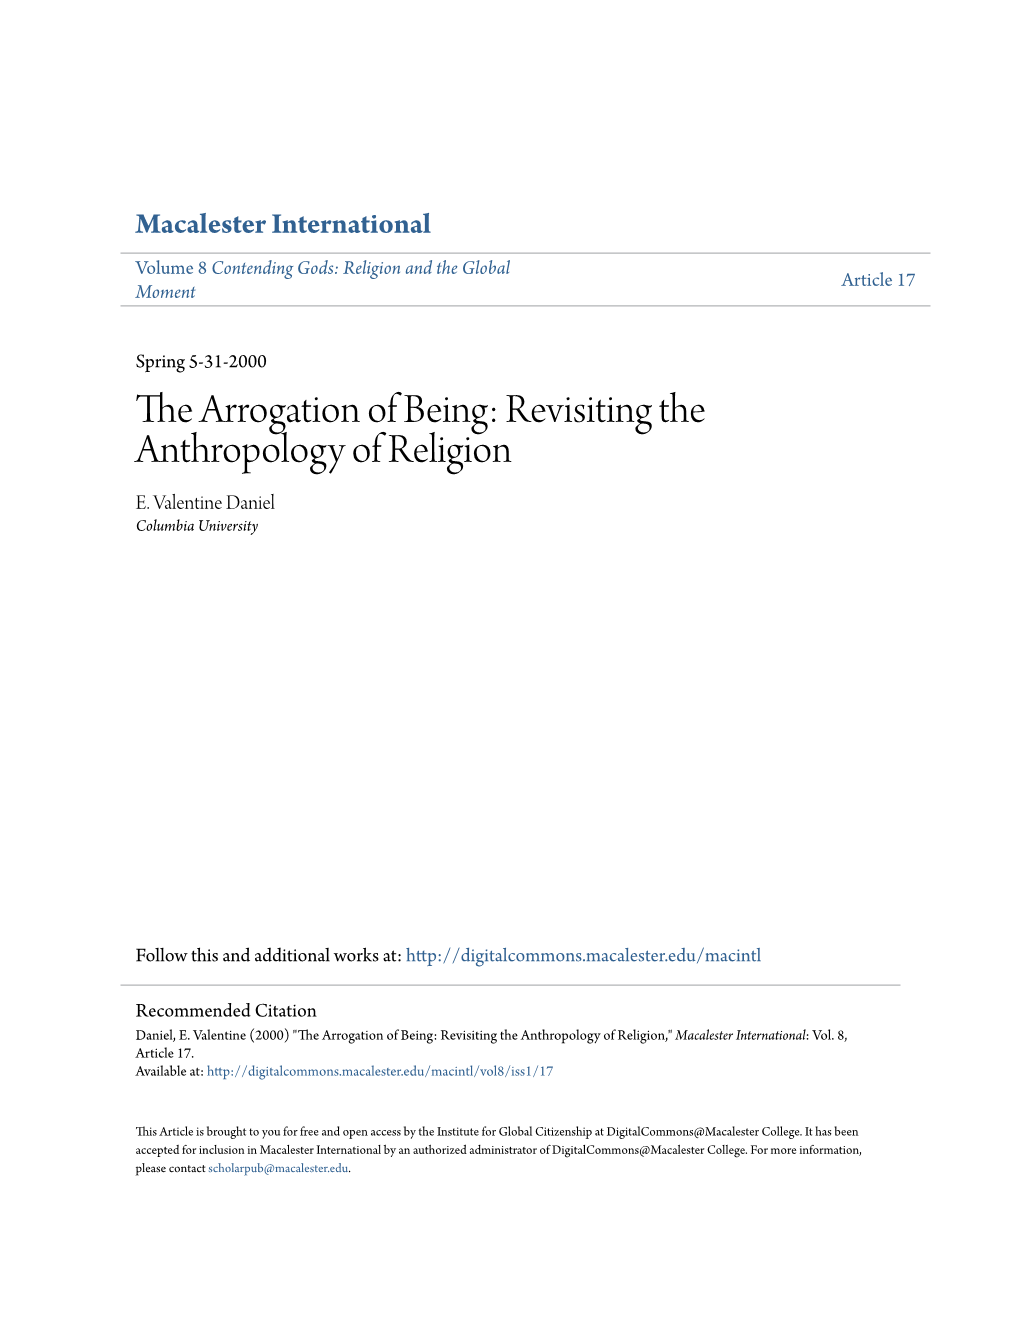 Revisiting the Anthropology of Religion E